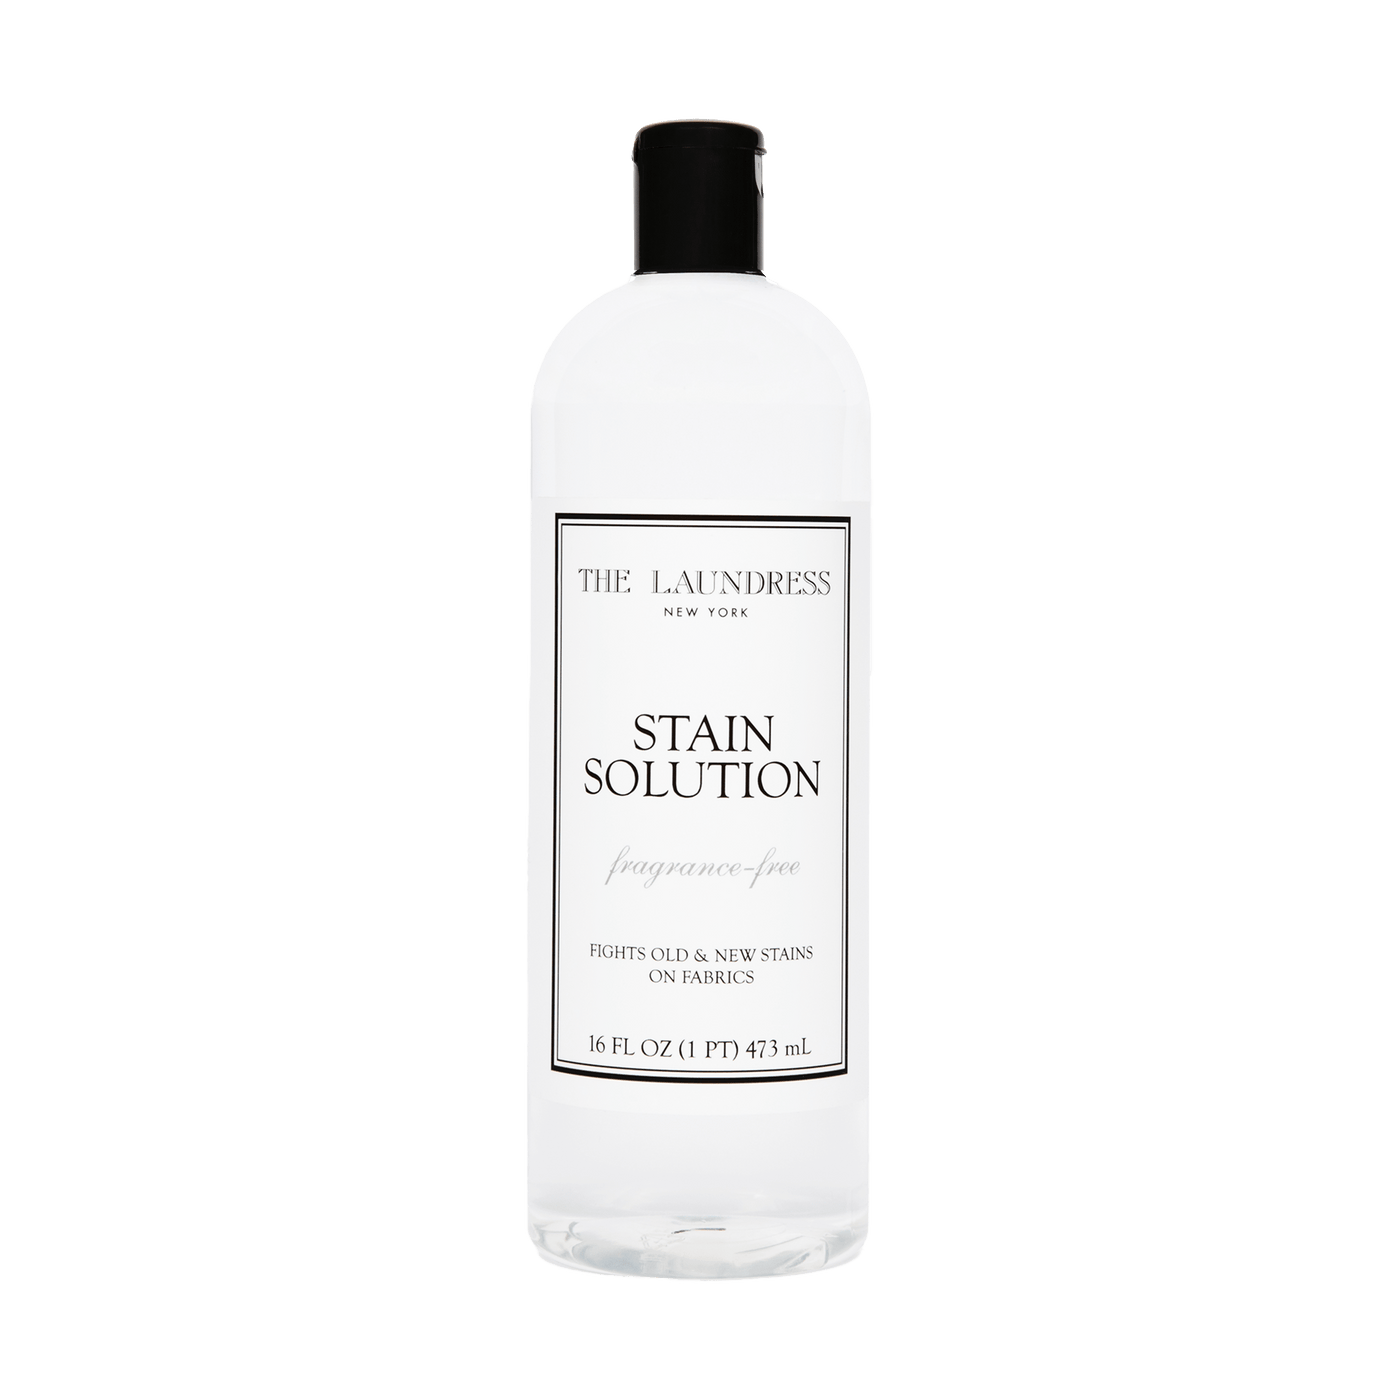 The Laundress Stain Solution with a fragrance-free formula designed to fight new & old stains.